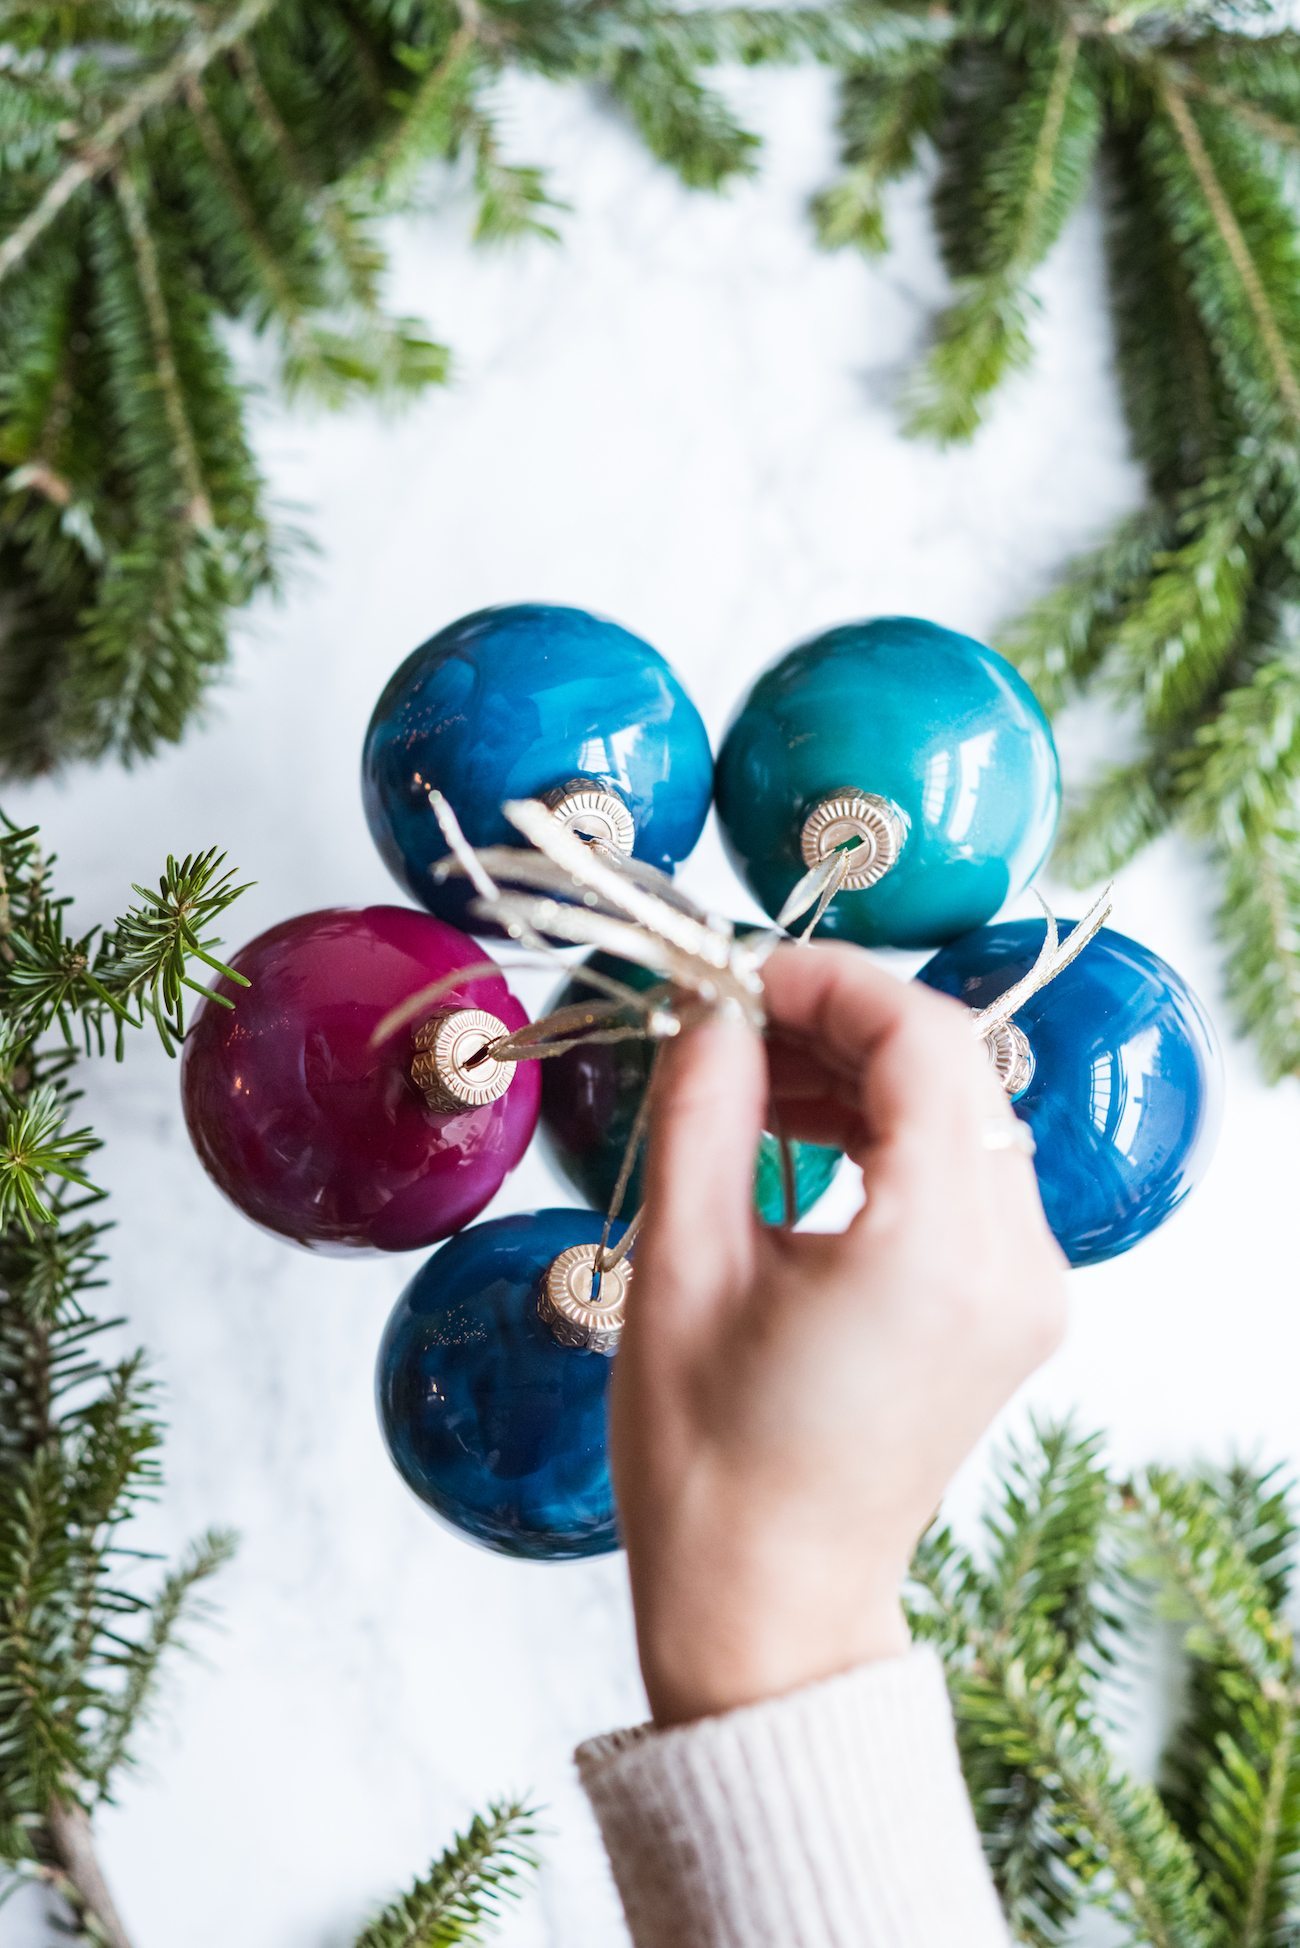 DIY Swirled Melted Crayon Ornaments | DIY ornaments, holiday entertaining tips, holiday cocktail recipes, homemade ornaments and more from @cydconverse